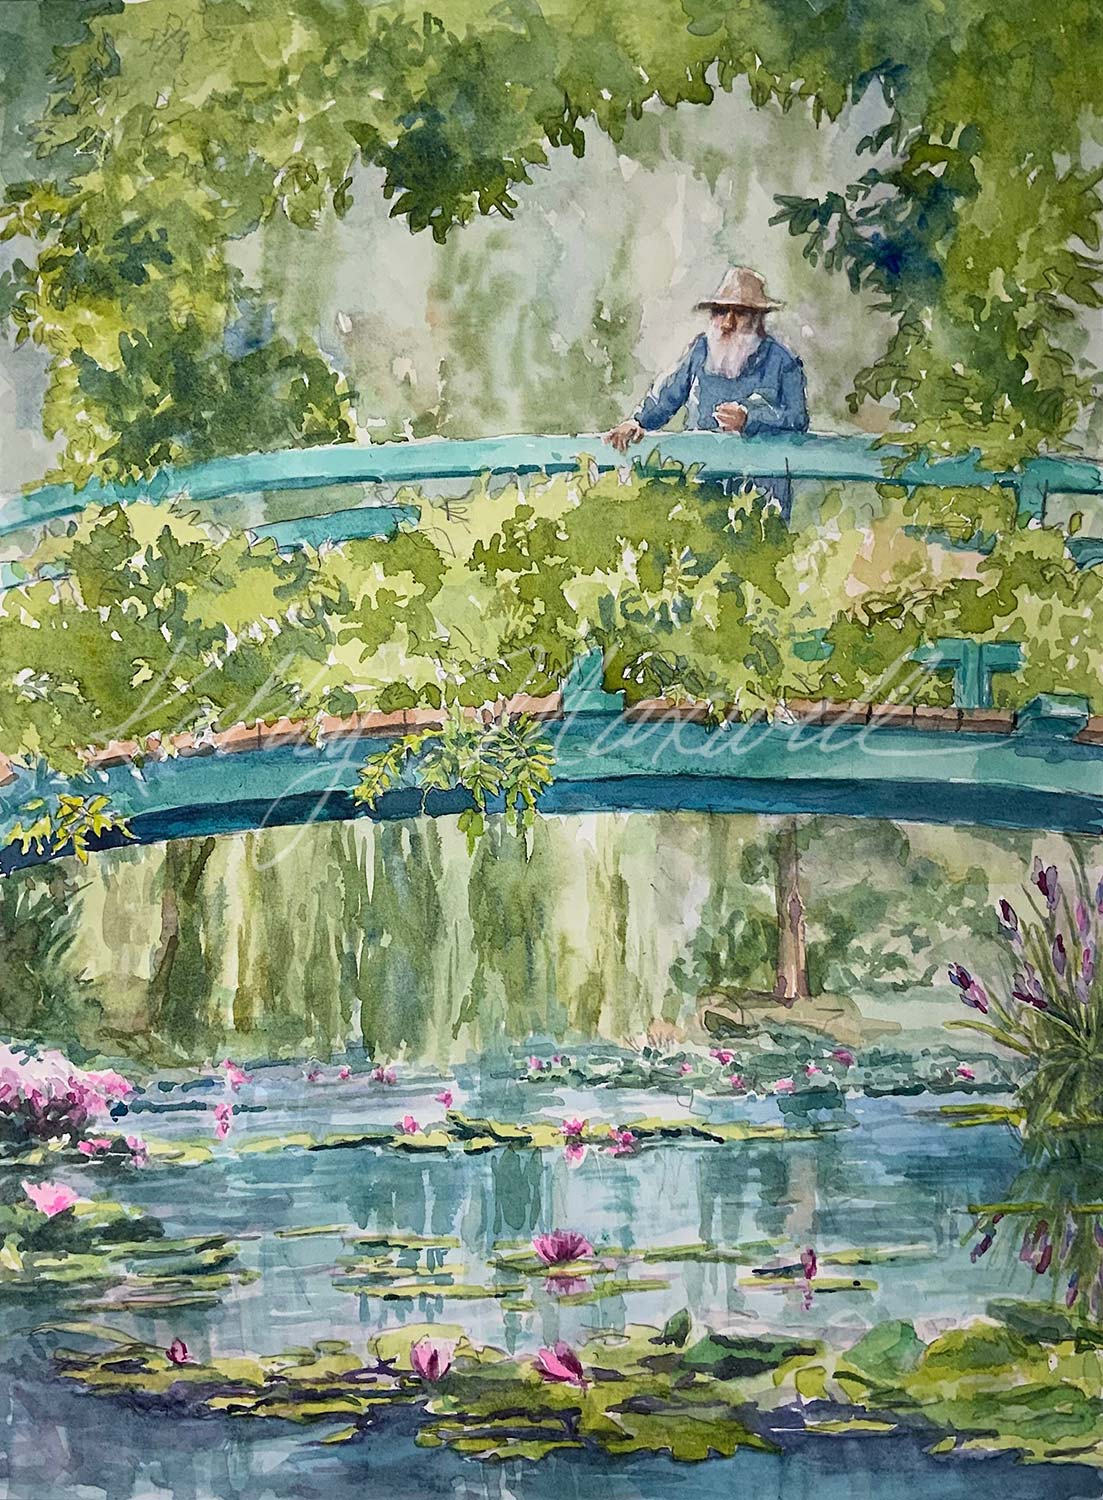 Monet in his Garden, Giverny, France